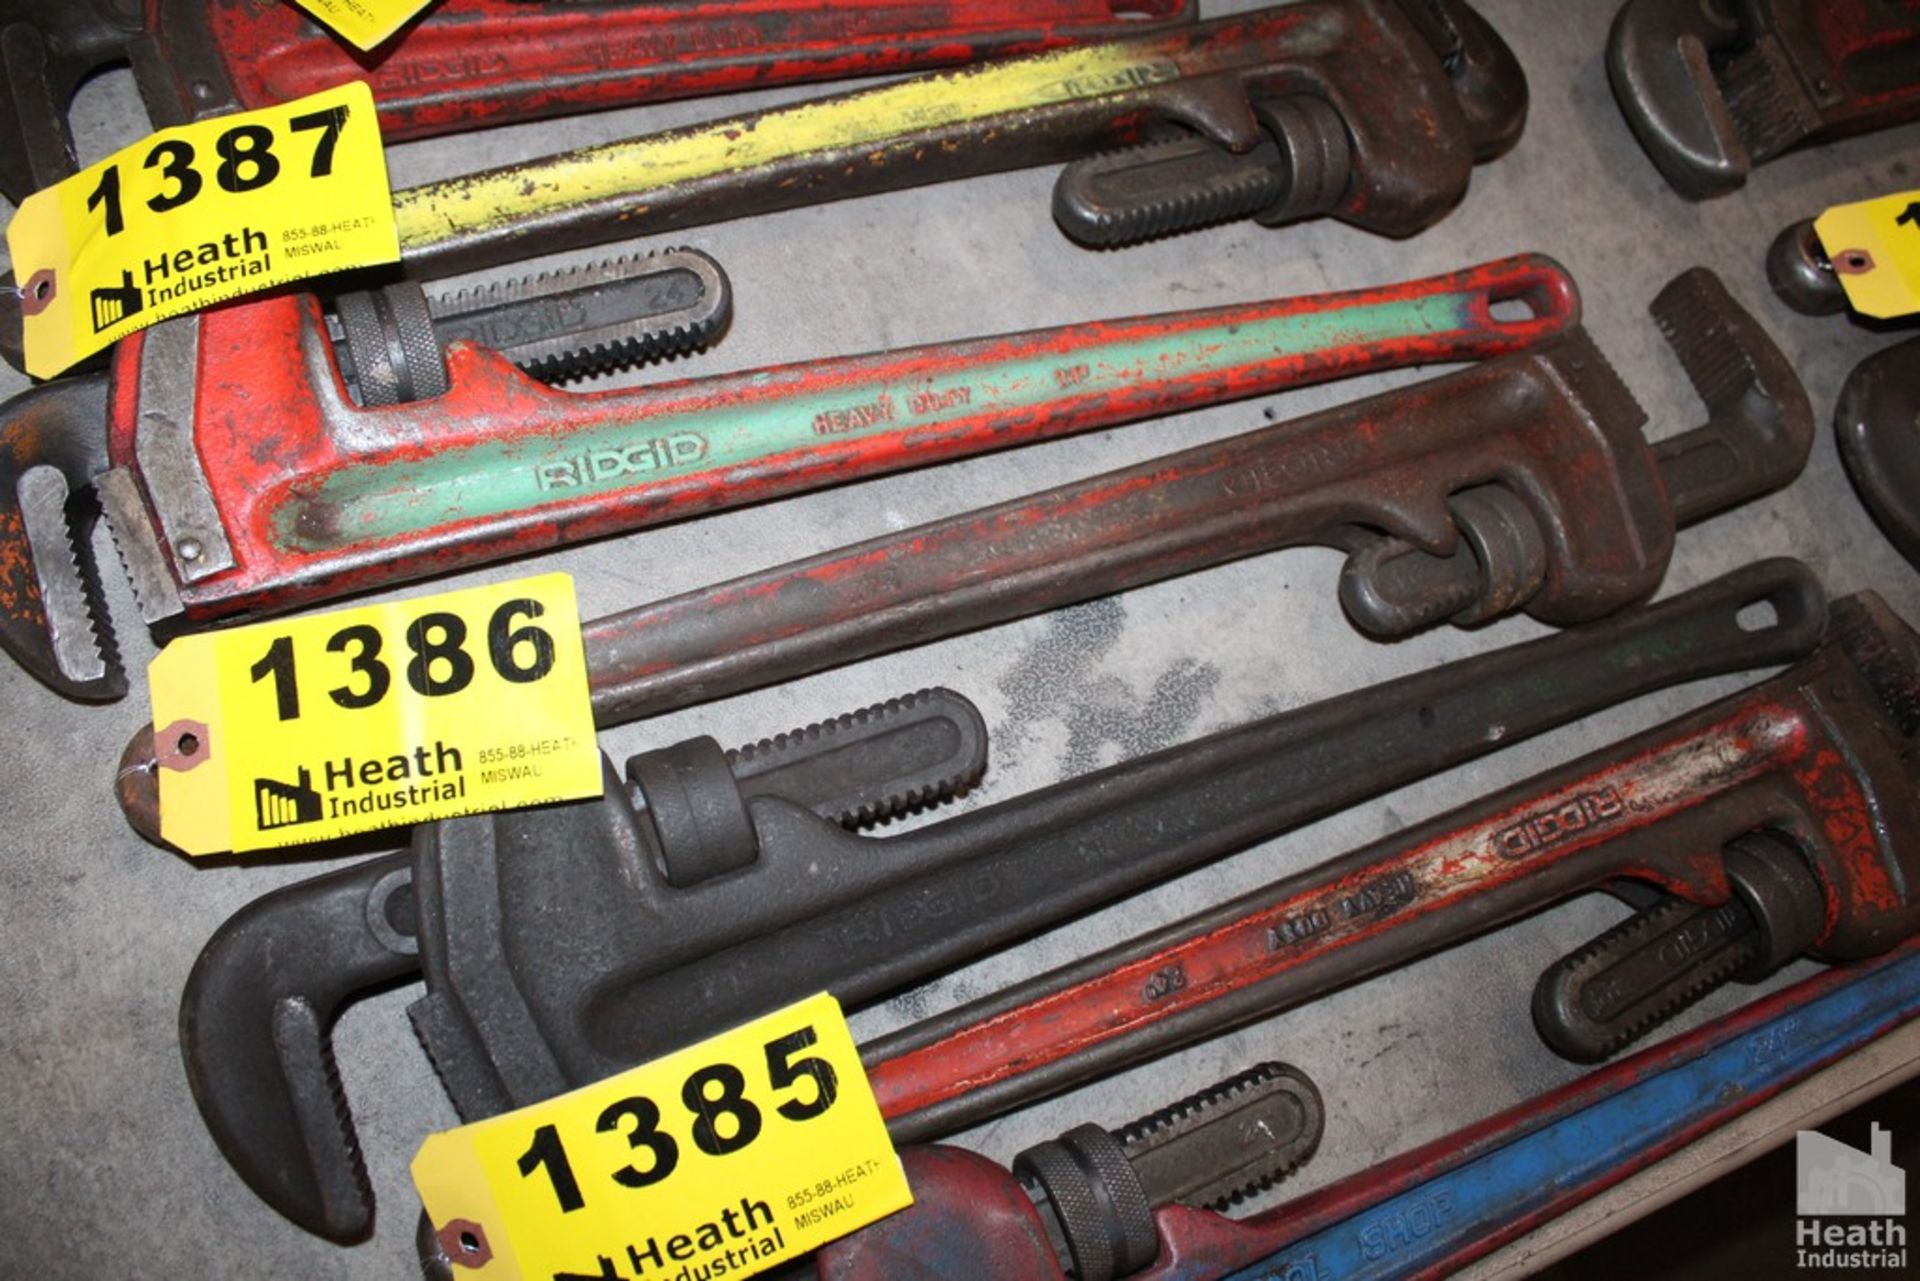 (2) RIDGID 24" PIPE WRENCHES